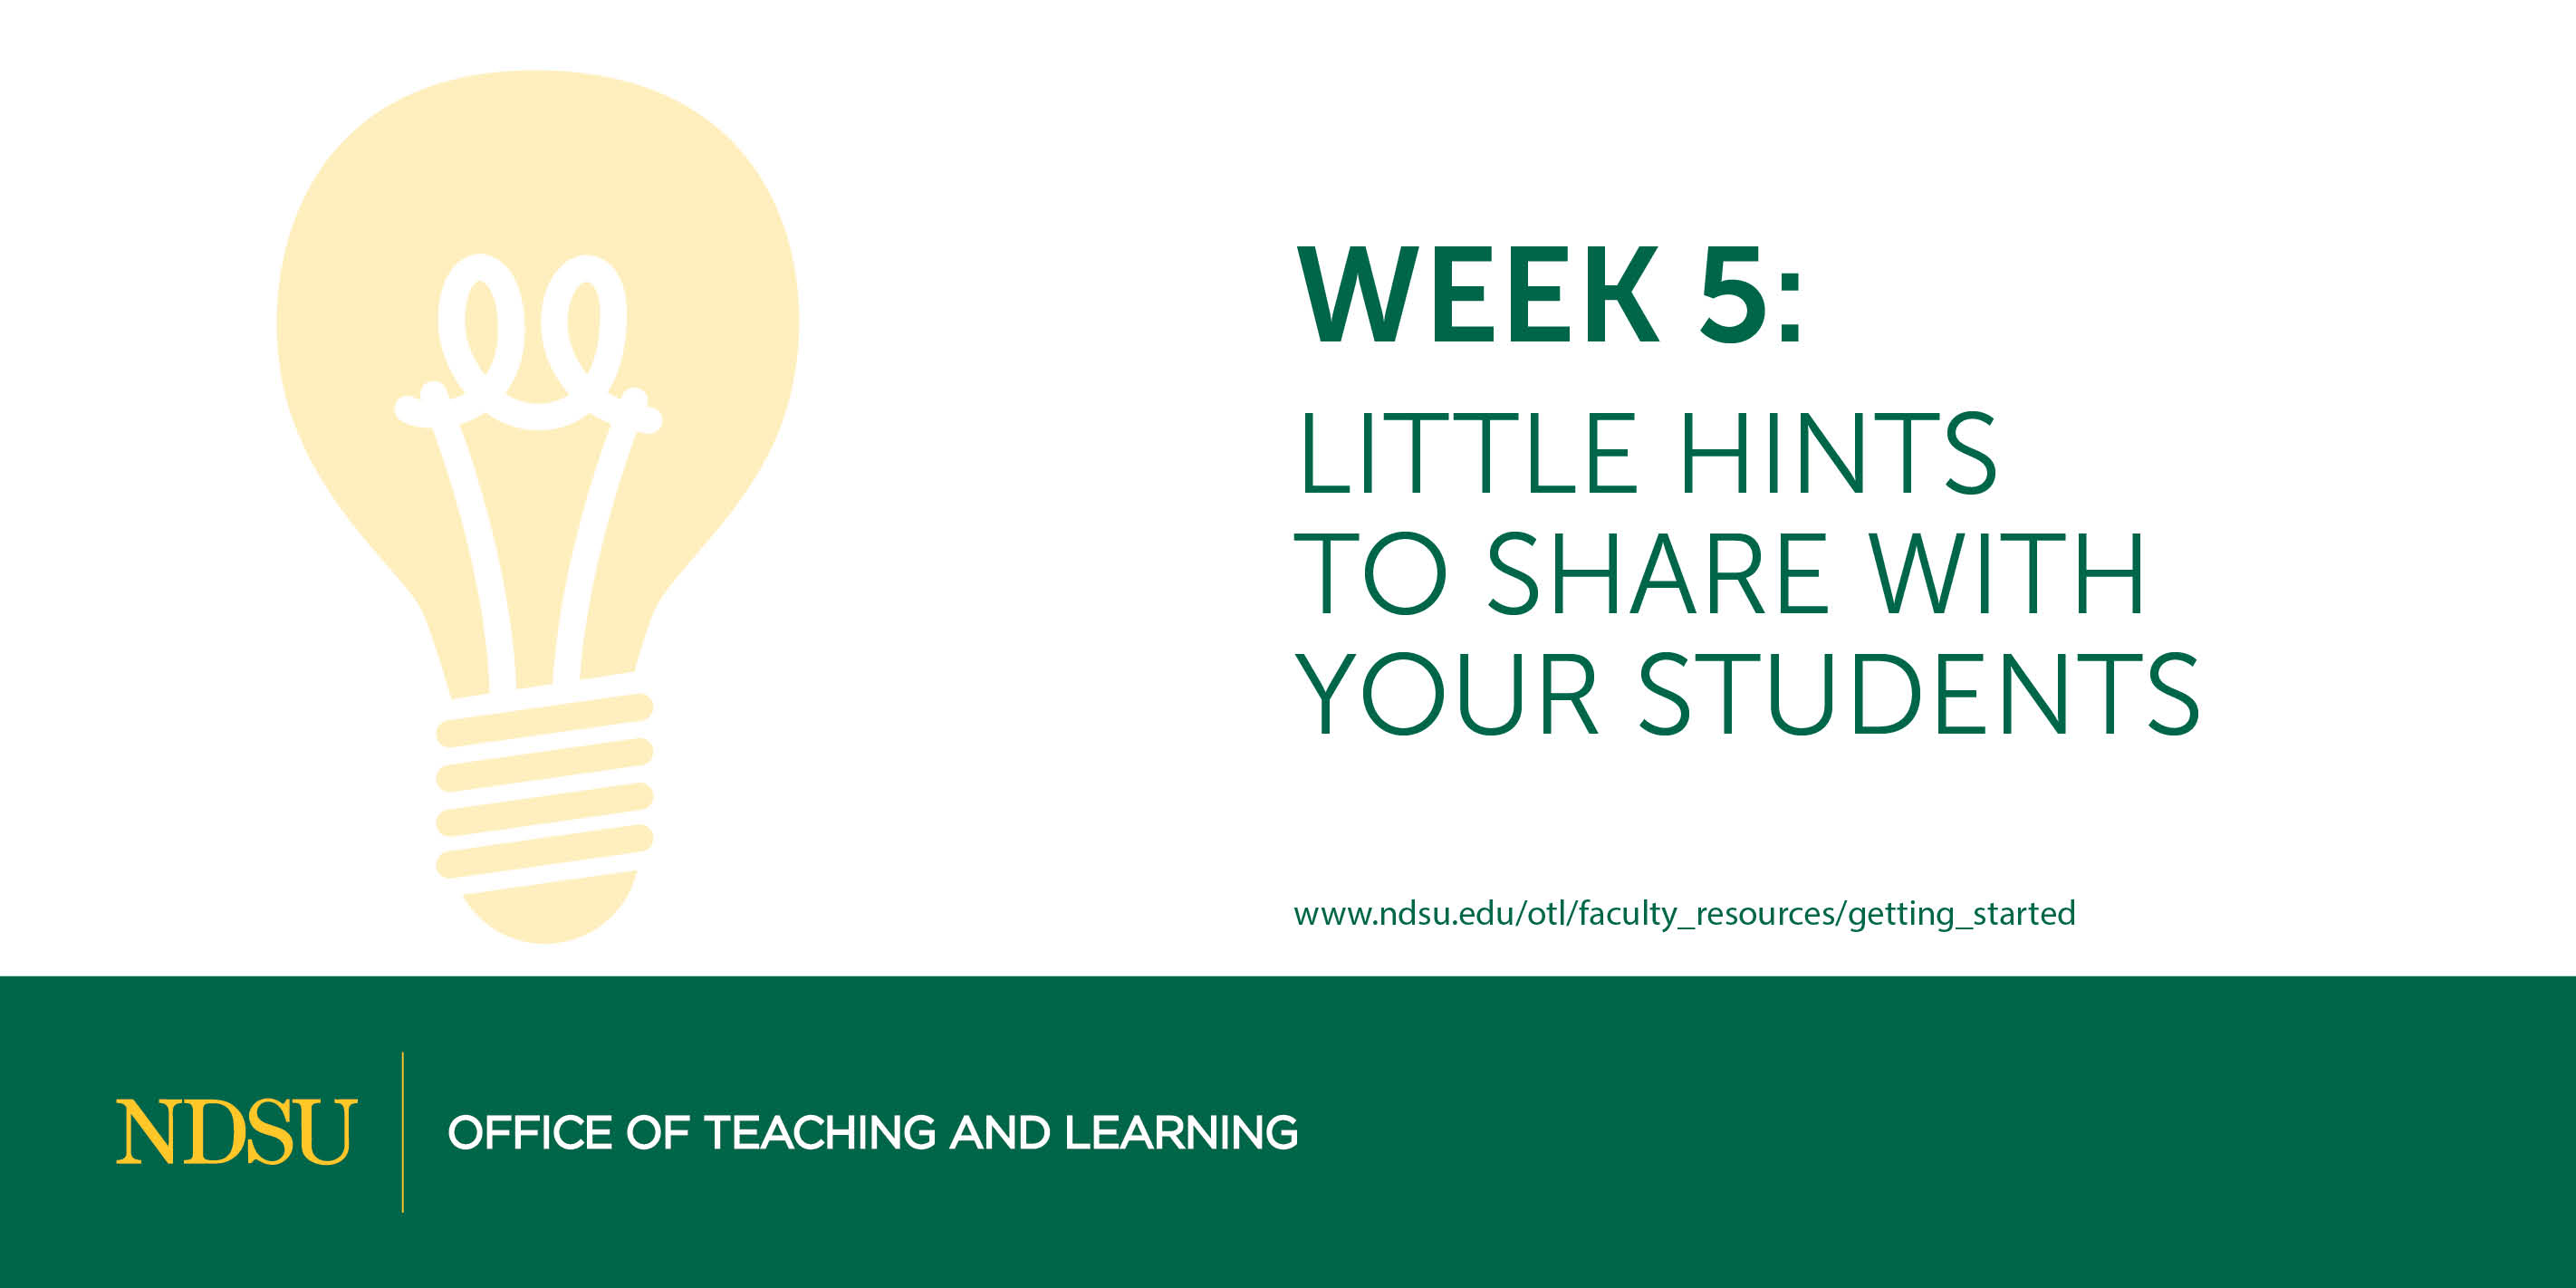 Week 5: Little Hints for Students